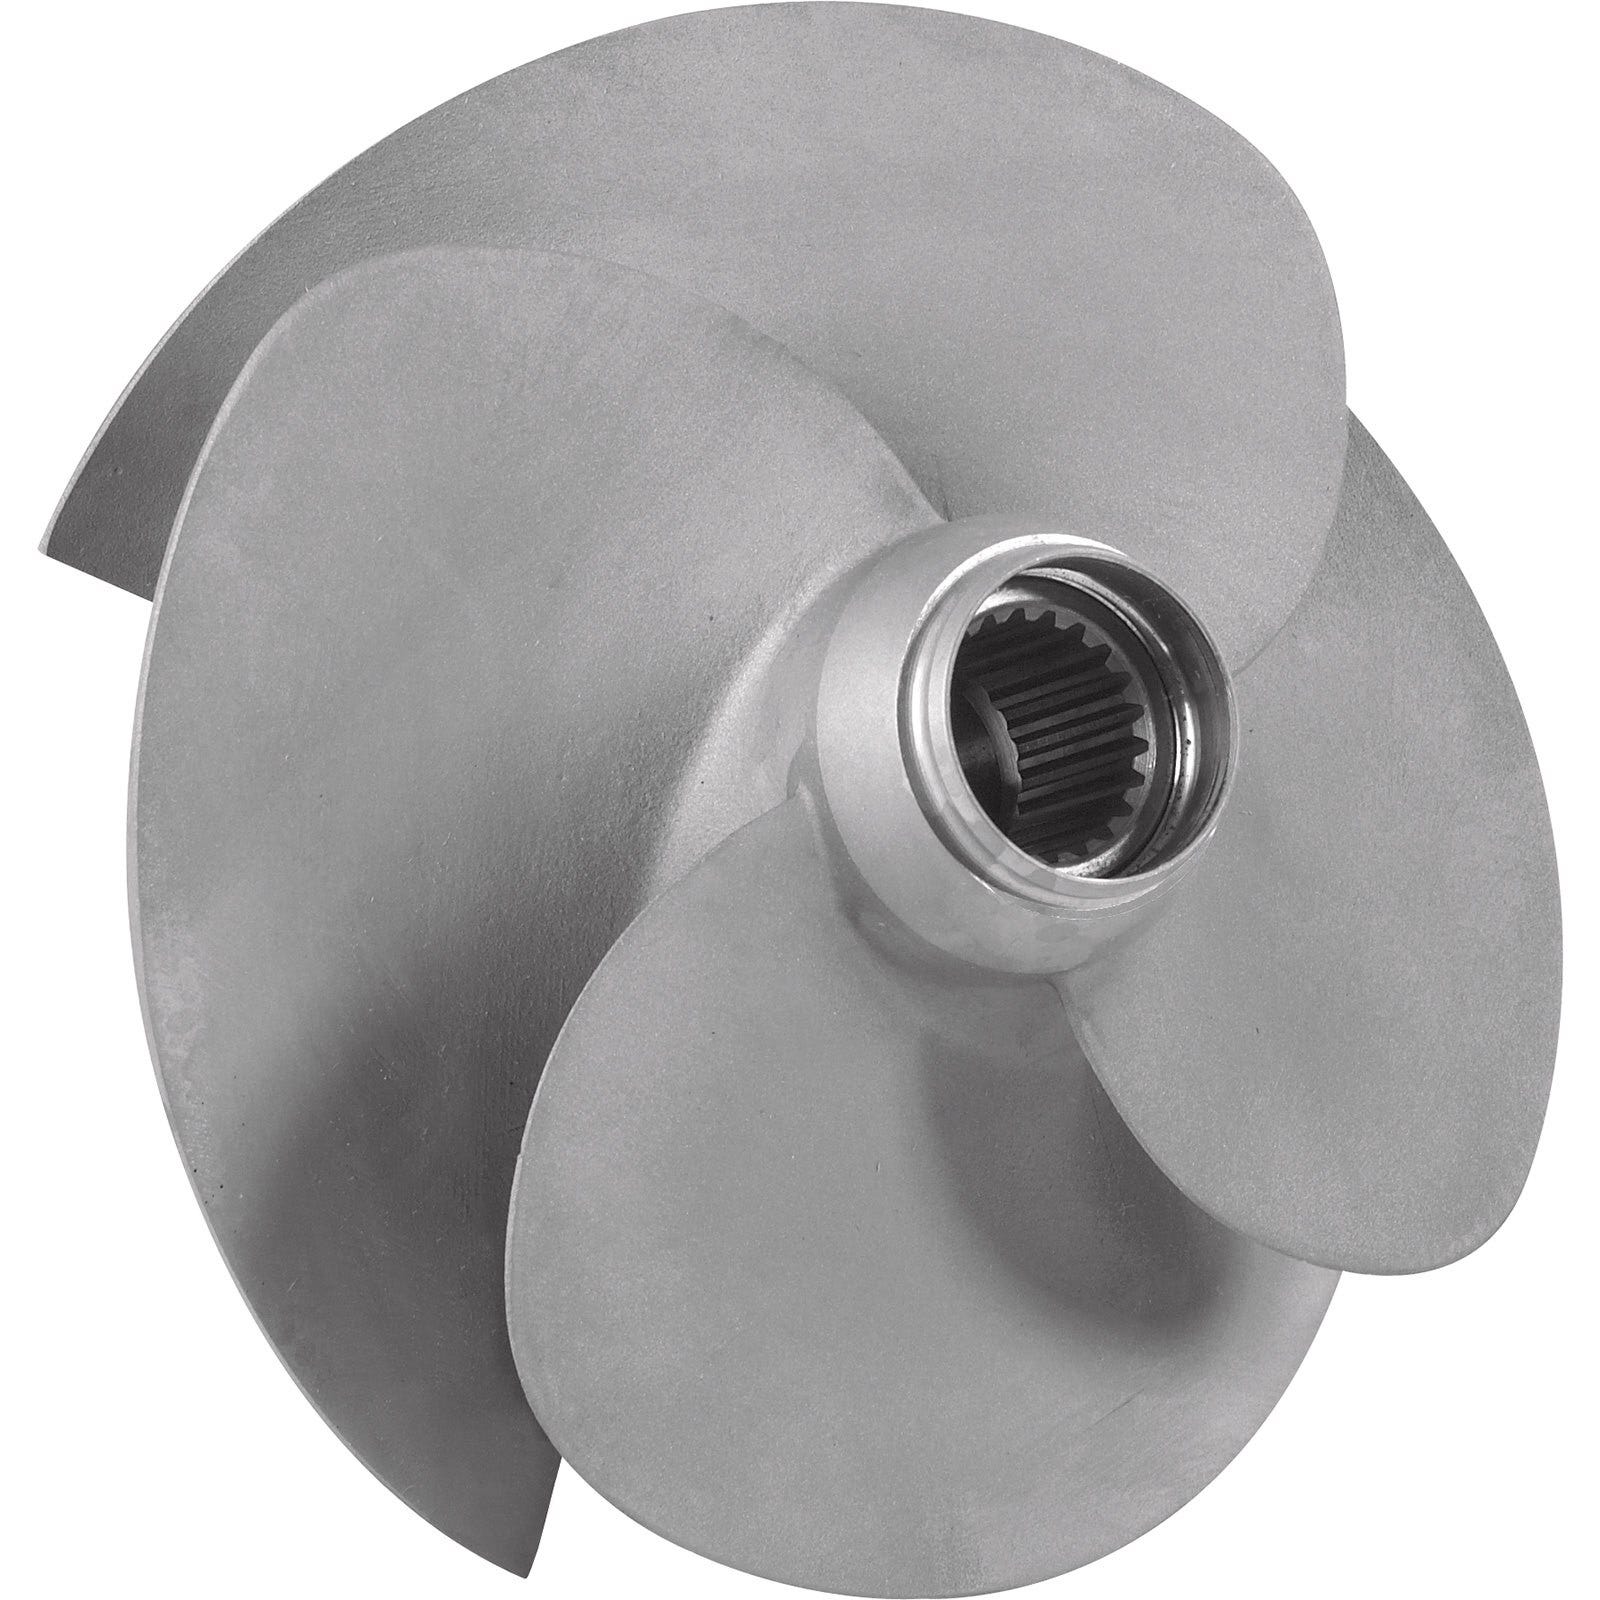 Gtx 230, Gtx Ltd 230, Rxt 230 and Wake Pro 230 (2018) Impeller - 267001021 - The Parts Lodge